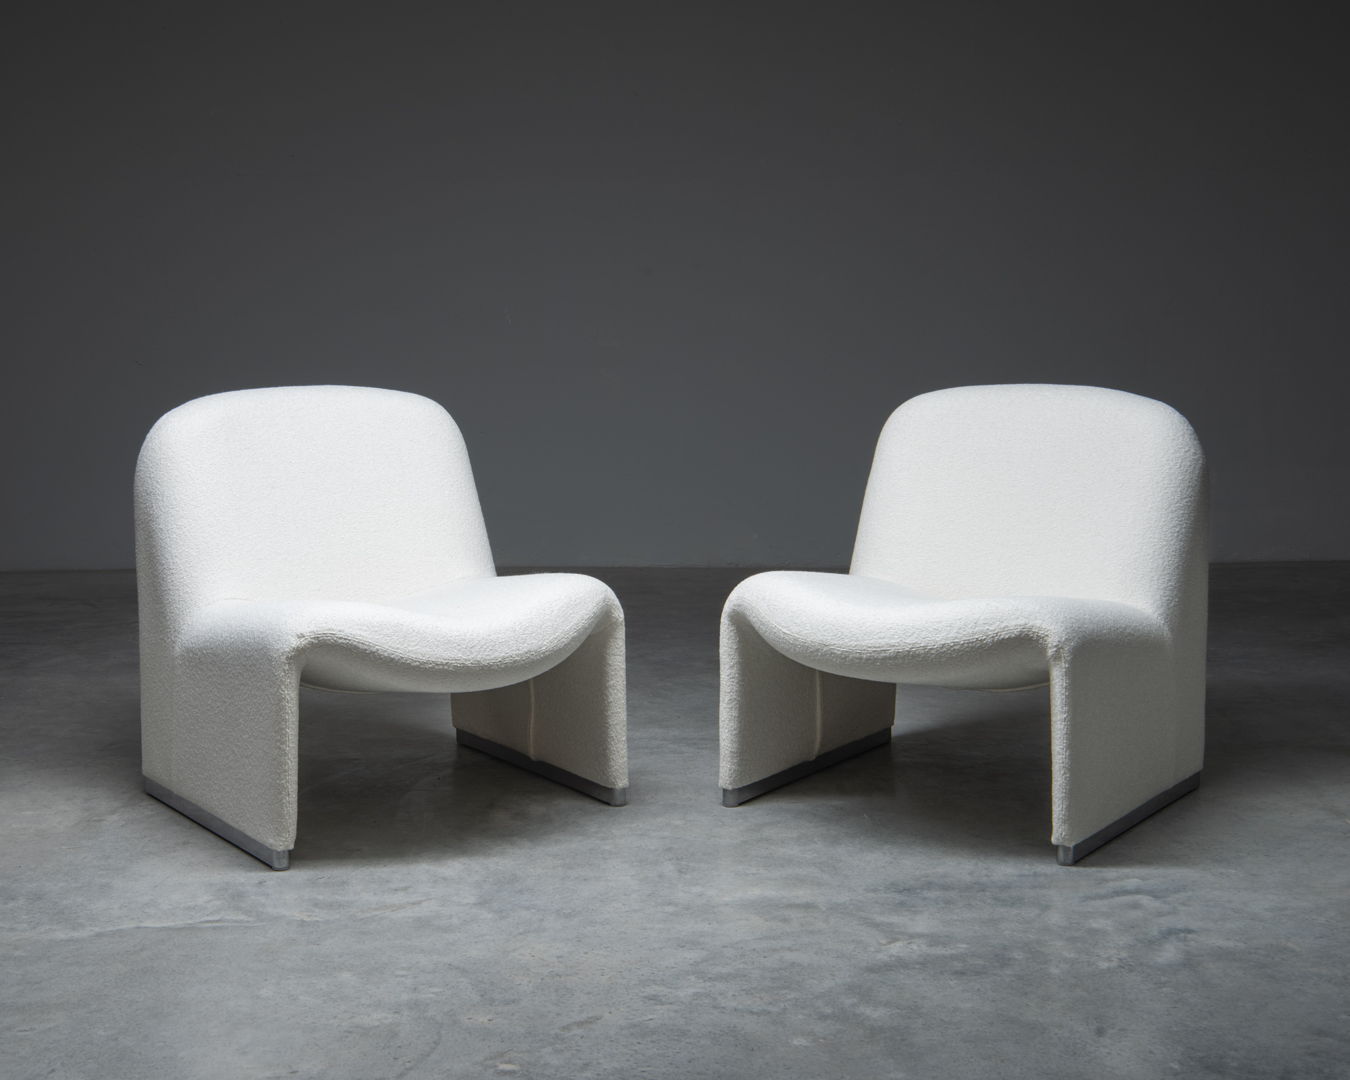 A pair of 'Alky' easy chairs, designed in the 1970s by Giancarlo Piretti for Castelli, Italy.